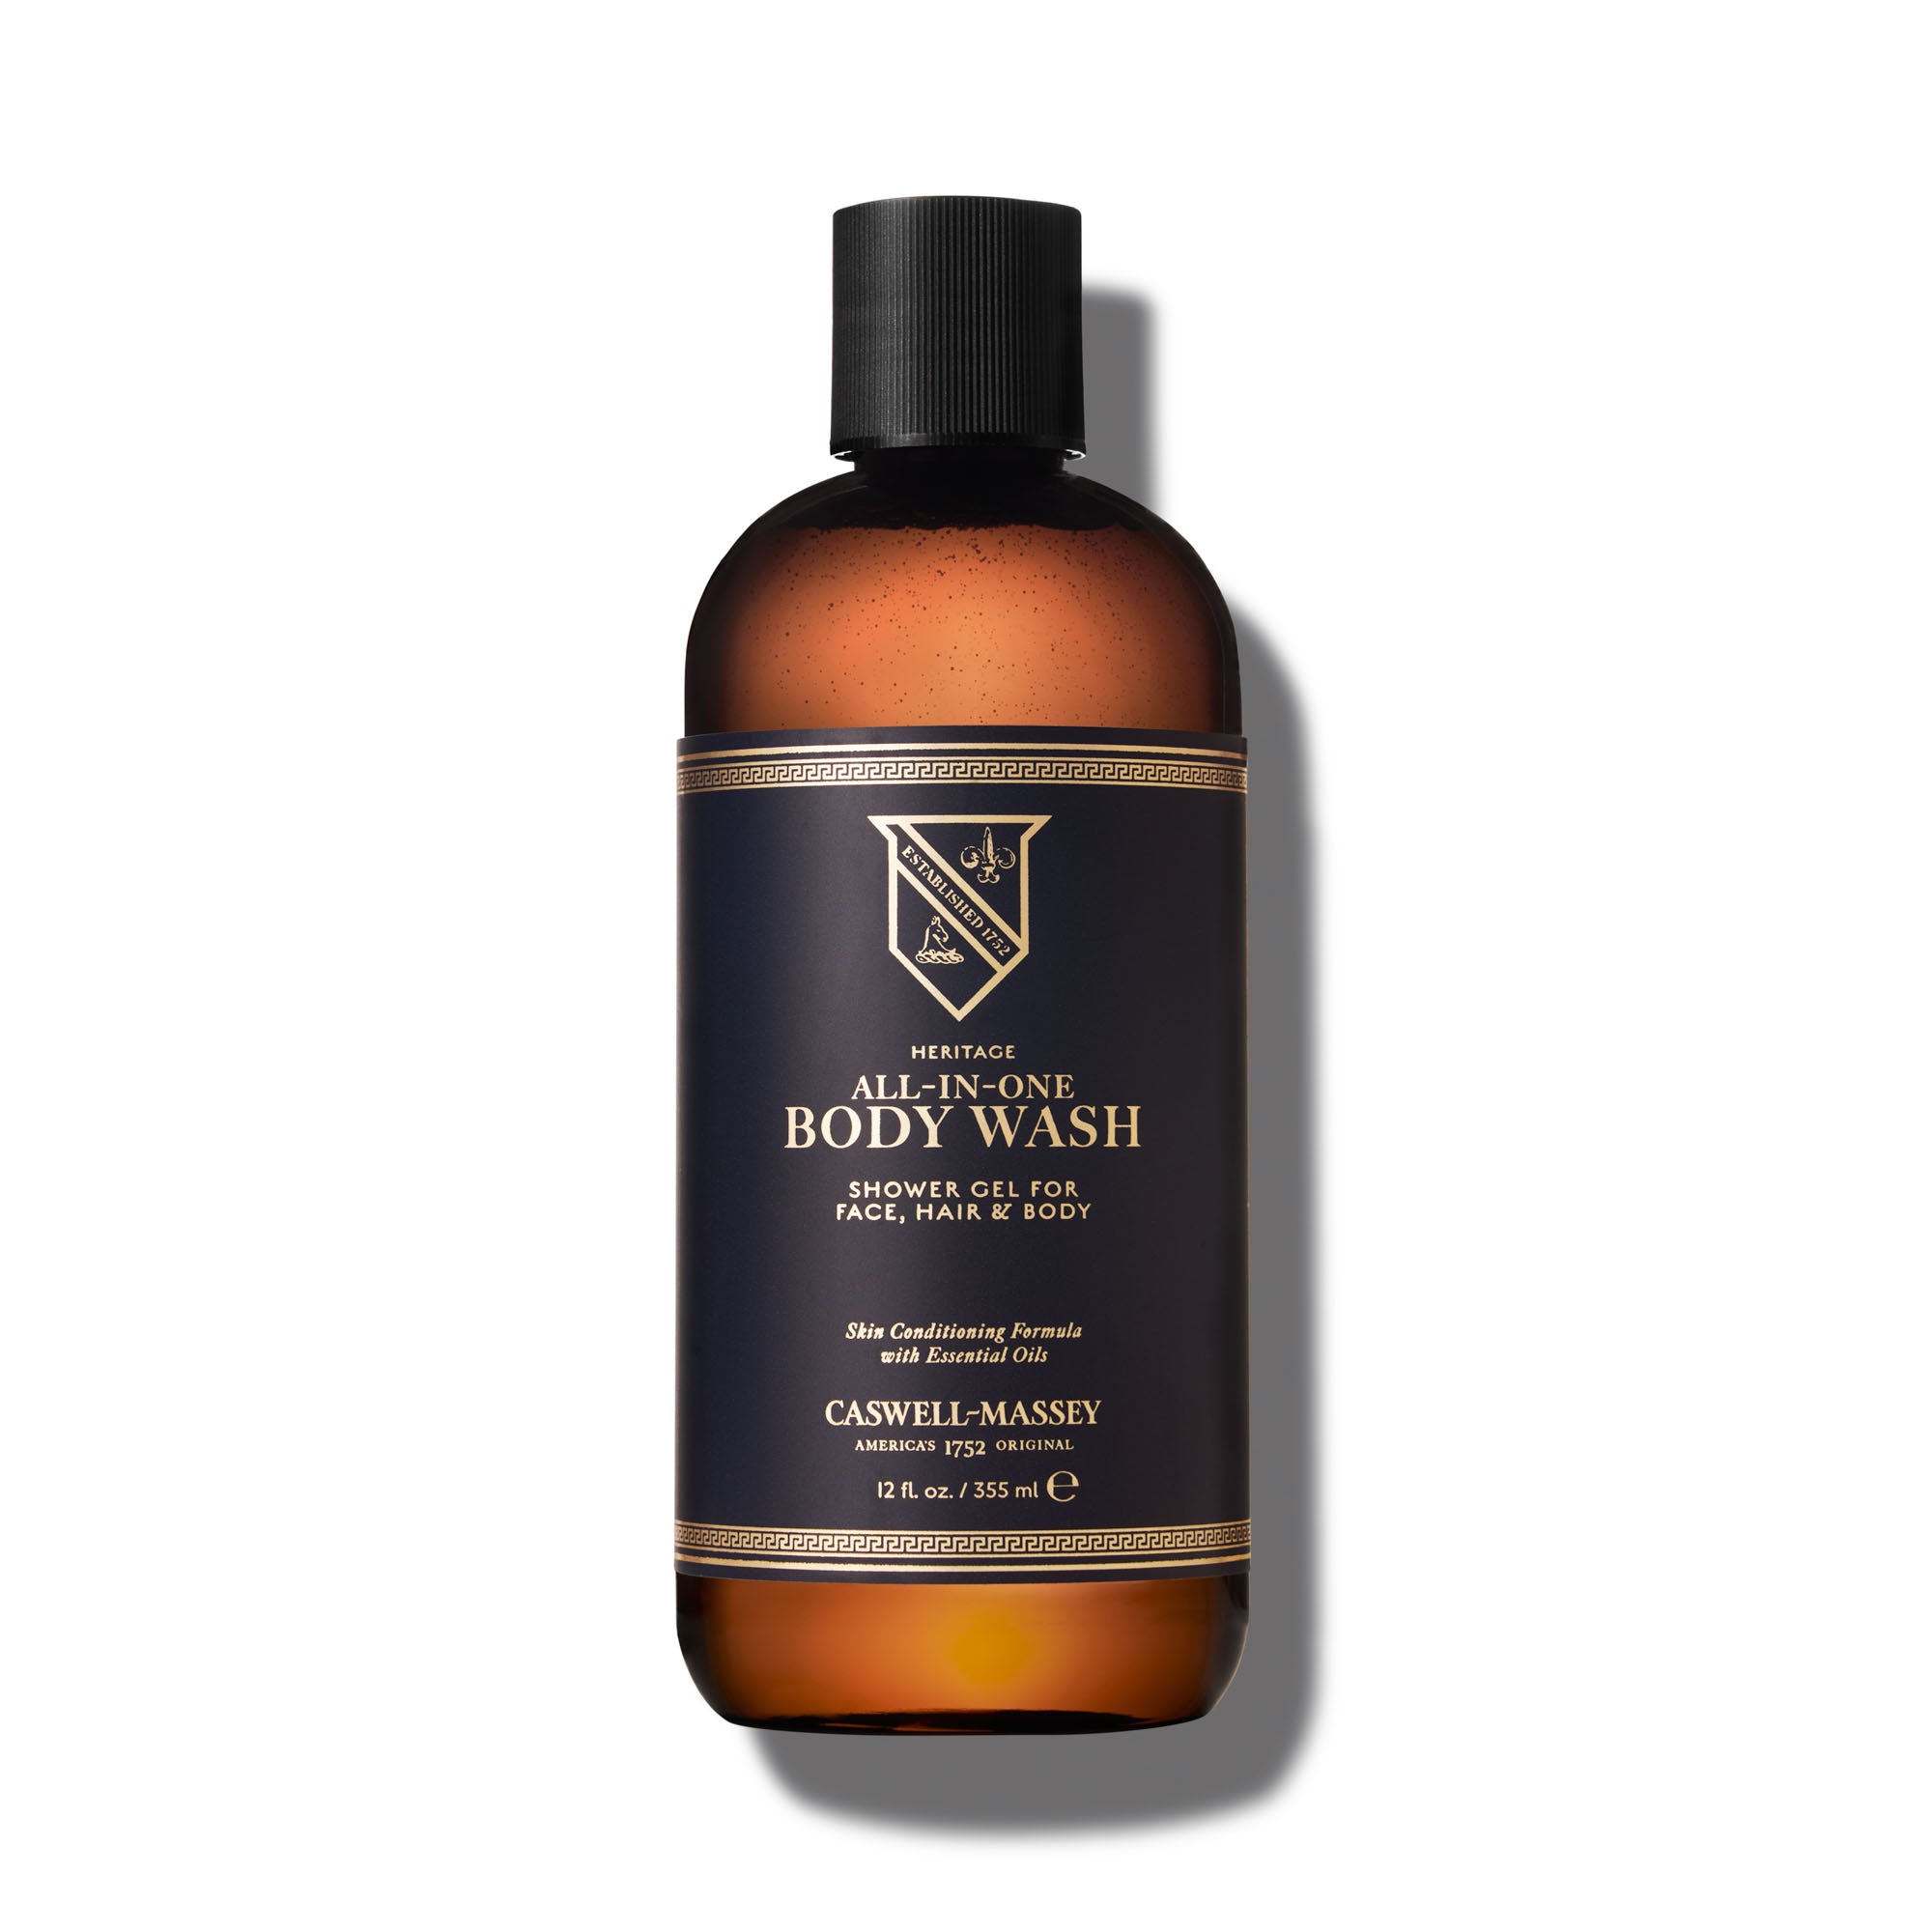 All-in-One Body Wash Body Wash Caswell-Massey® Standard Size | 12 oz  